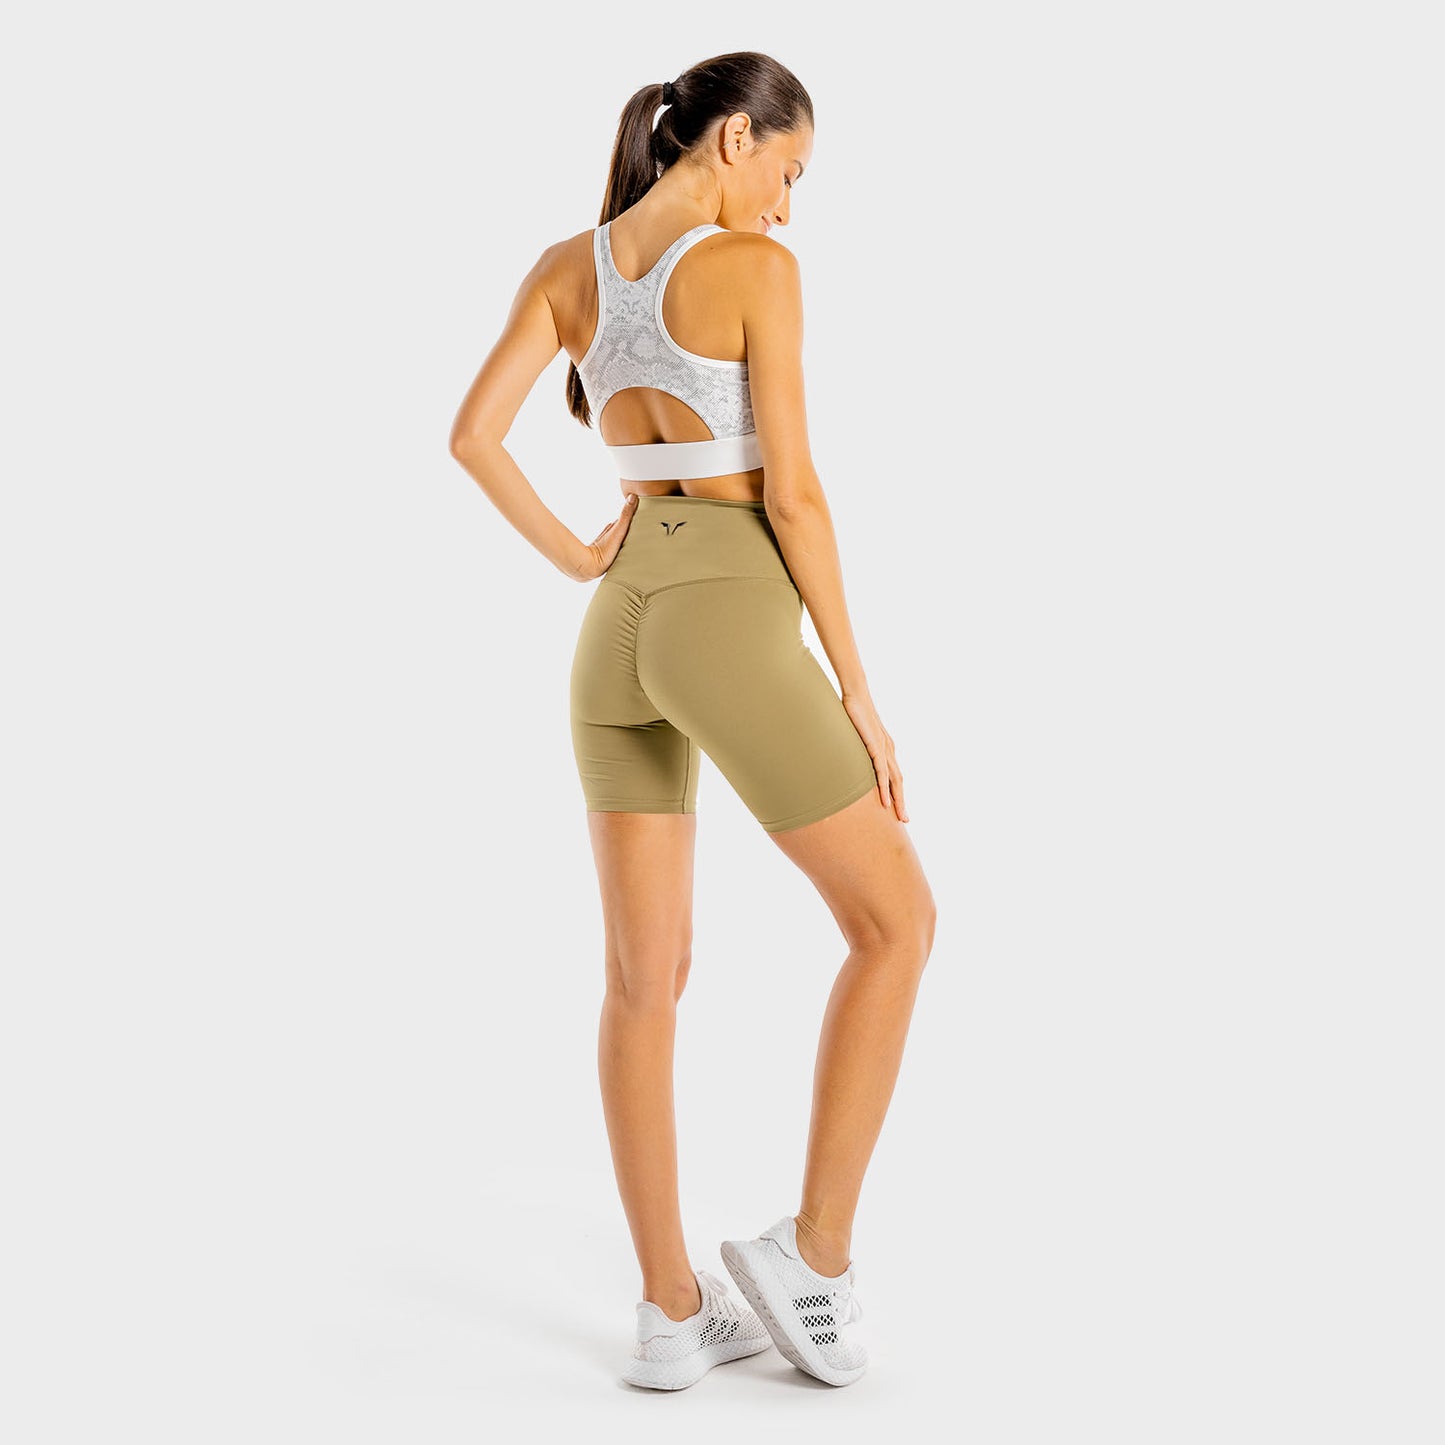 squatwolf-shorts-for-women-vibe-cycling-shorts-nude-workout-clothes